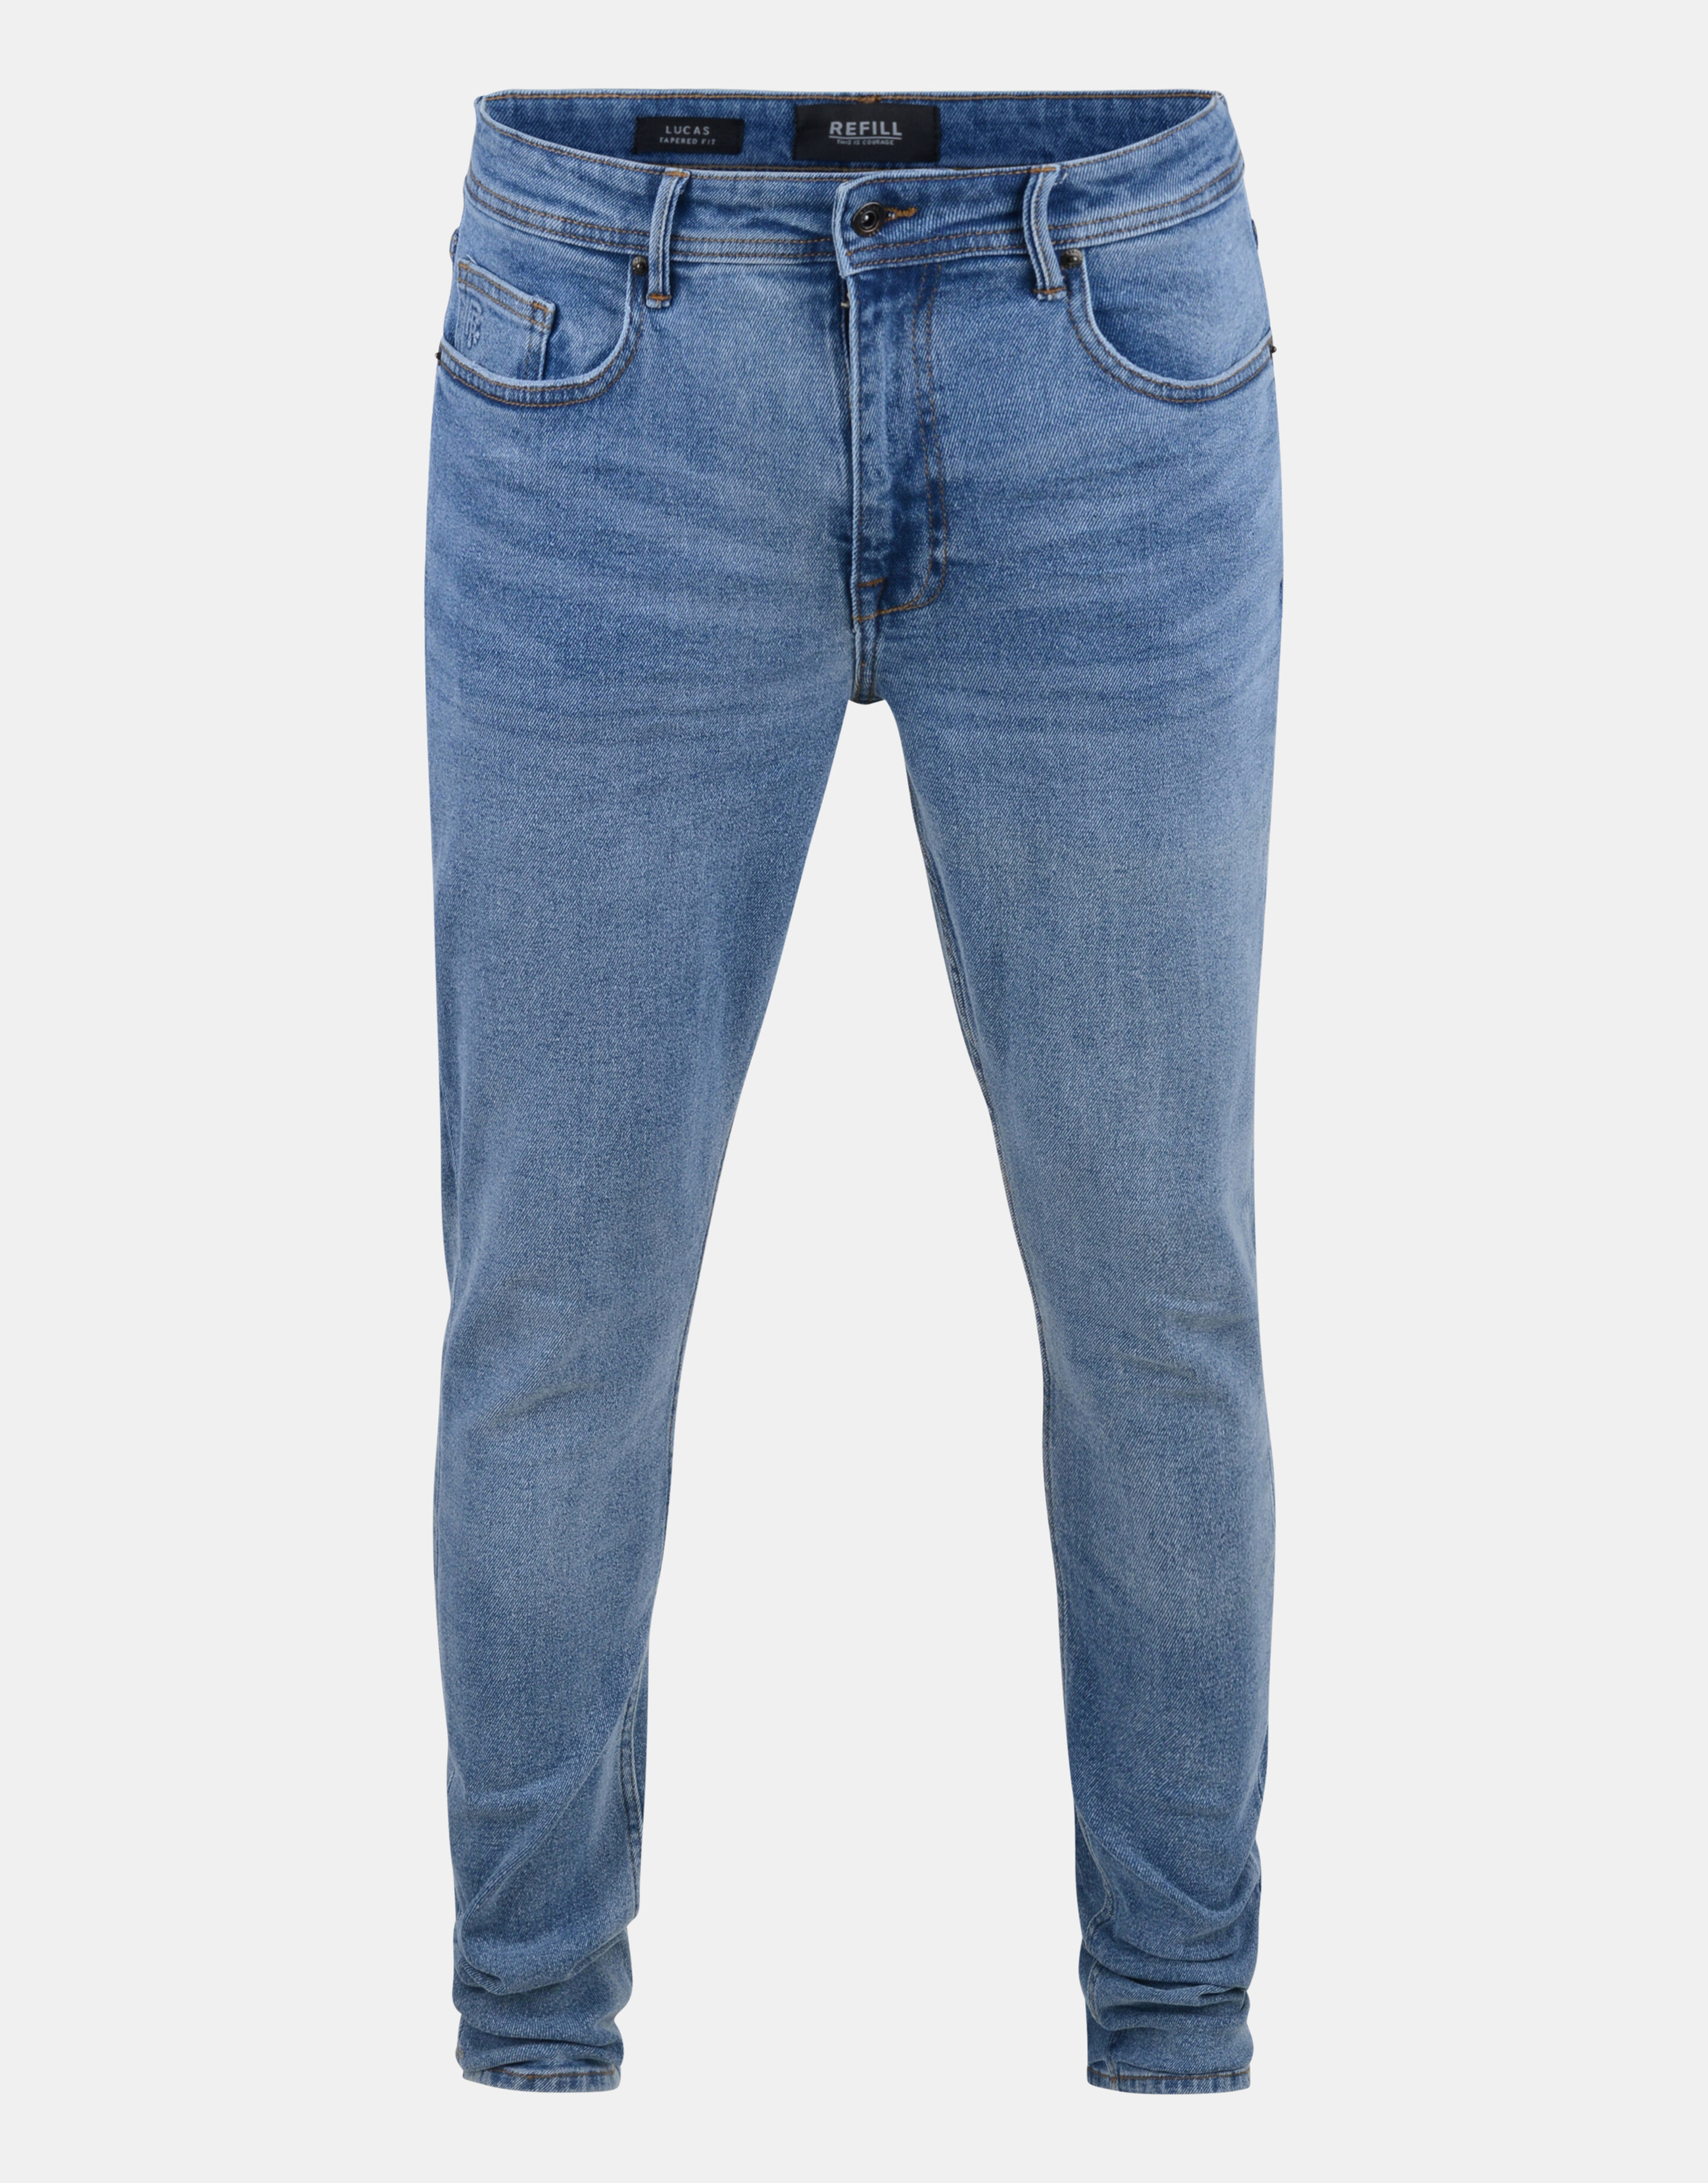 Lucas Slim Tapered Jeans L34 REFILL